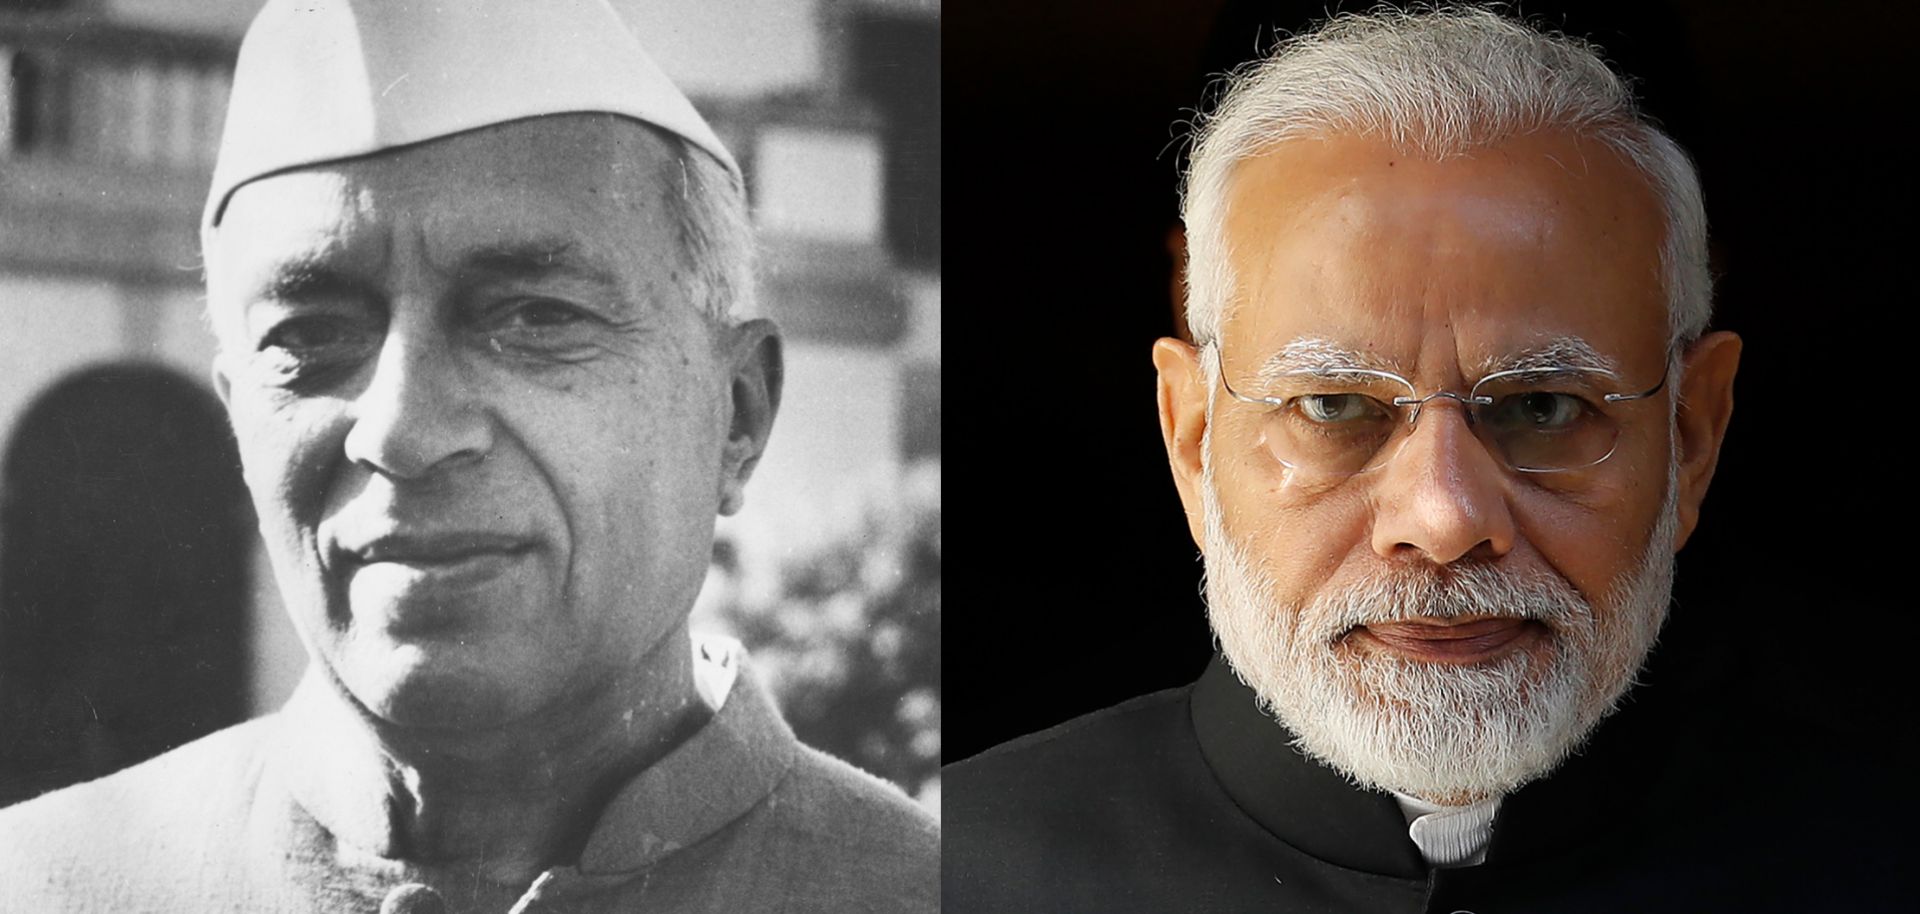 The policies of current Indian Prime Minister Narendra Modi (R) represent a departure from the secularist vision of the country's first prime minister, Jawaharlal Nehru (L).